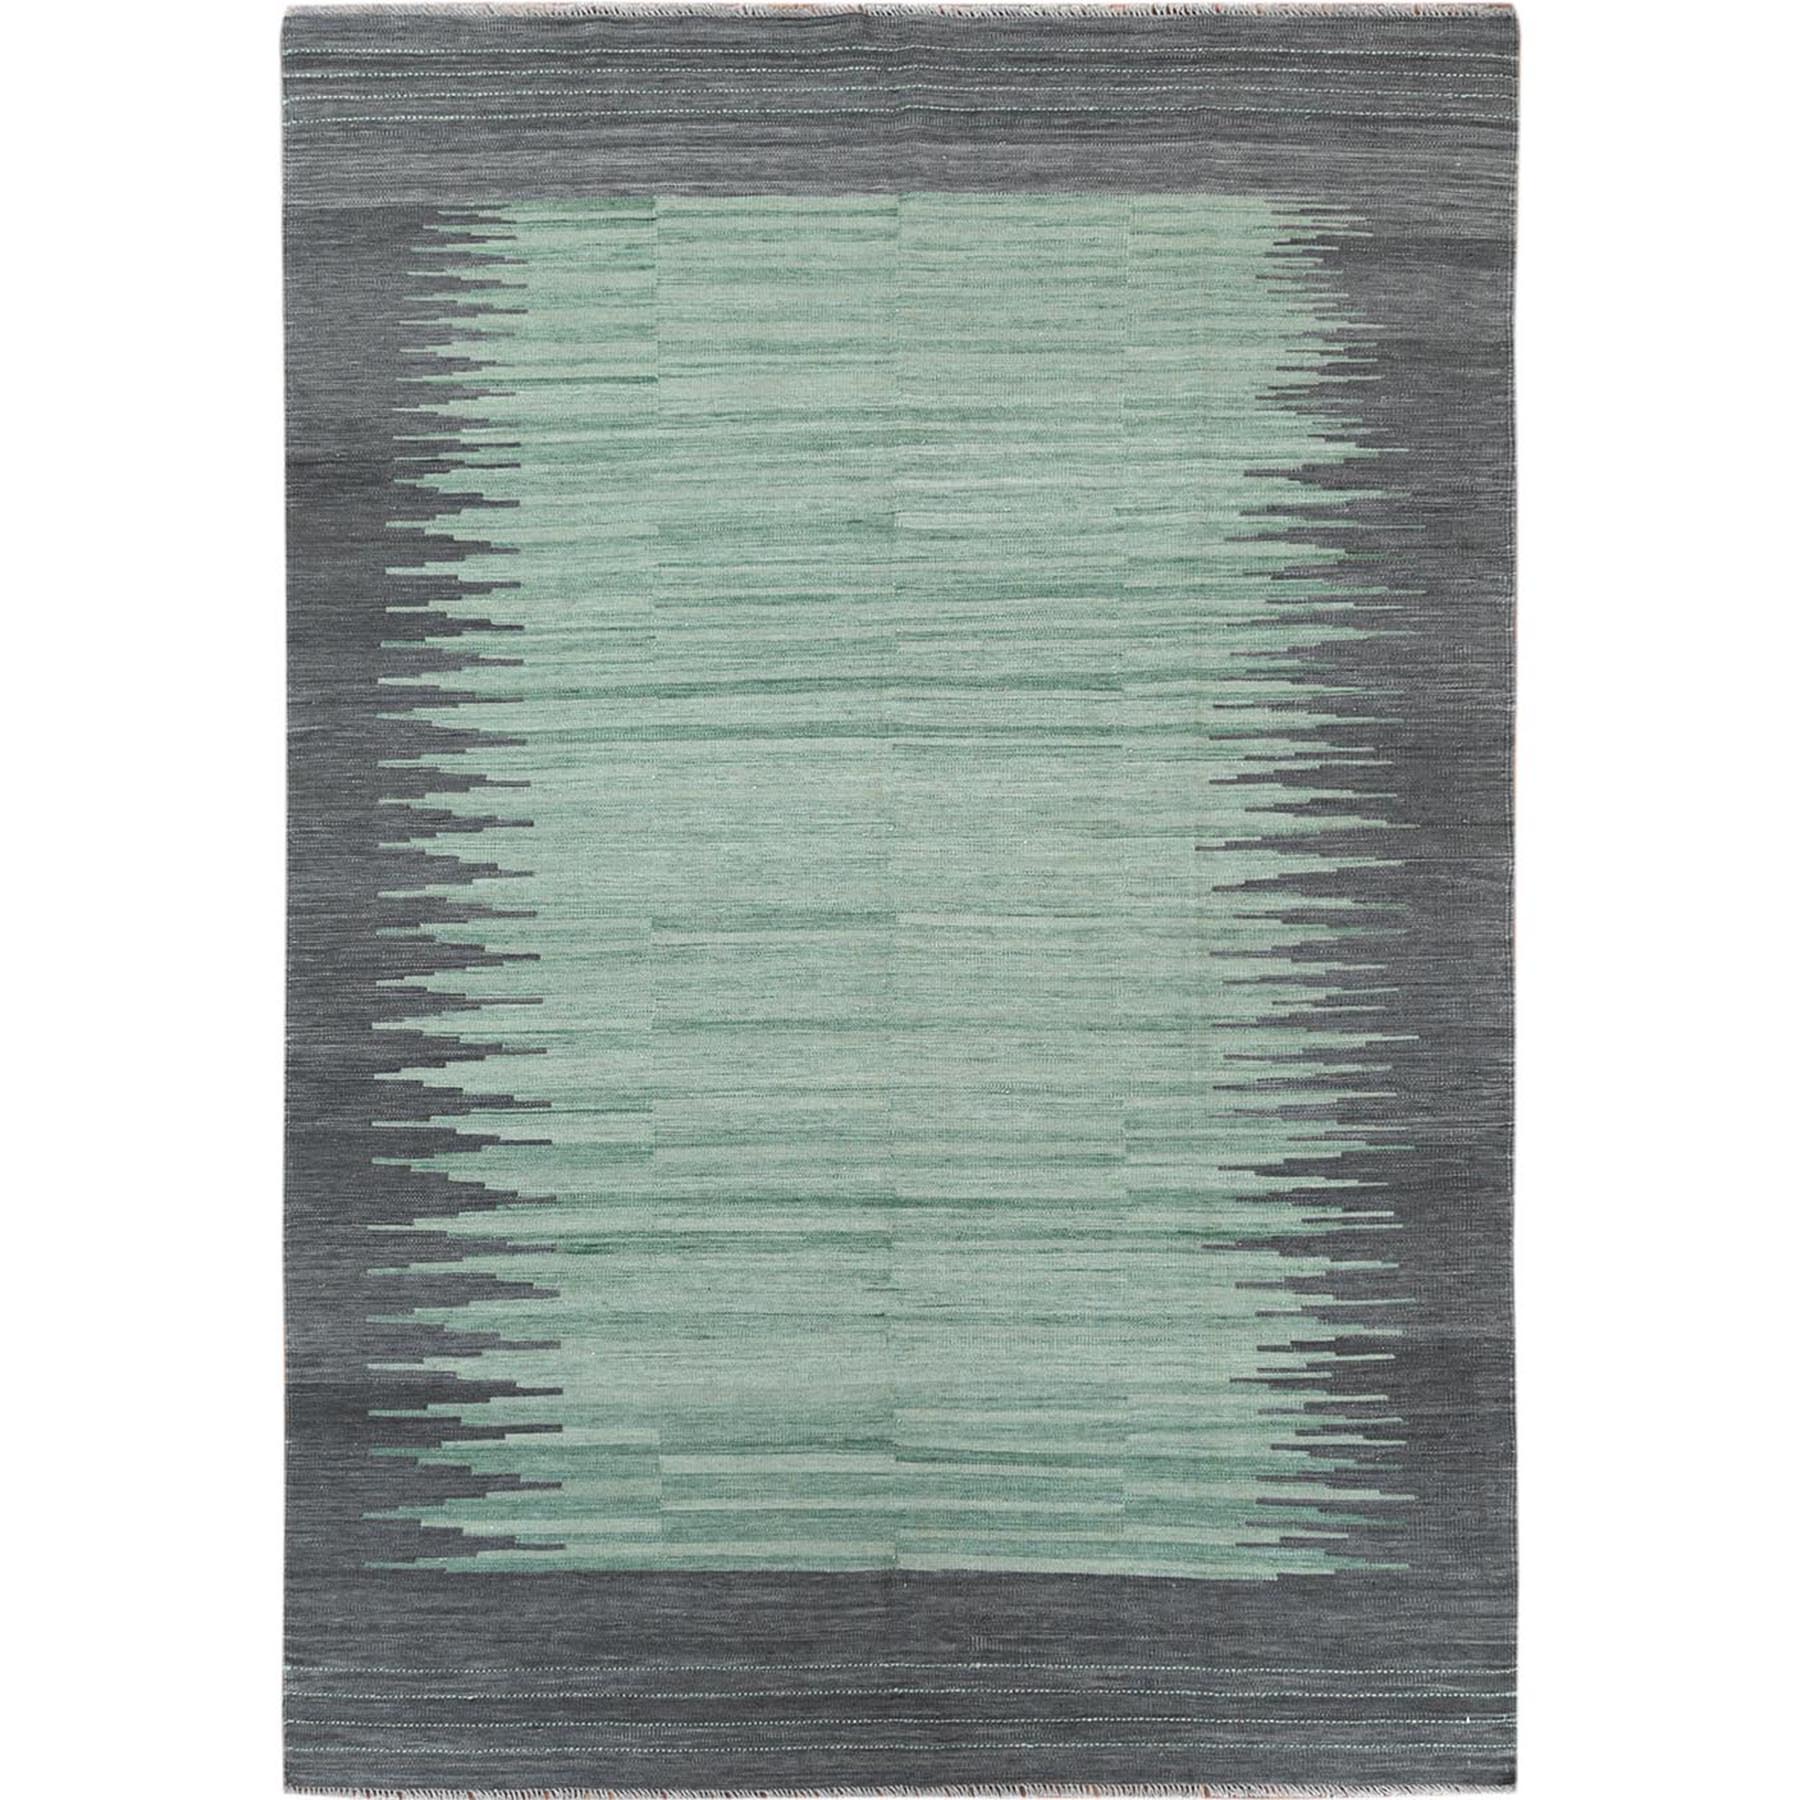 Modern & Contemporary Wool Hand-Woven Area Rug 6'1